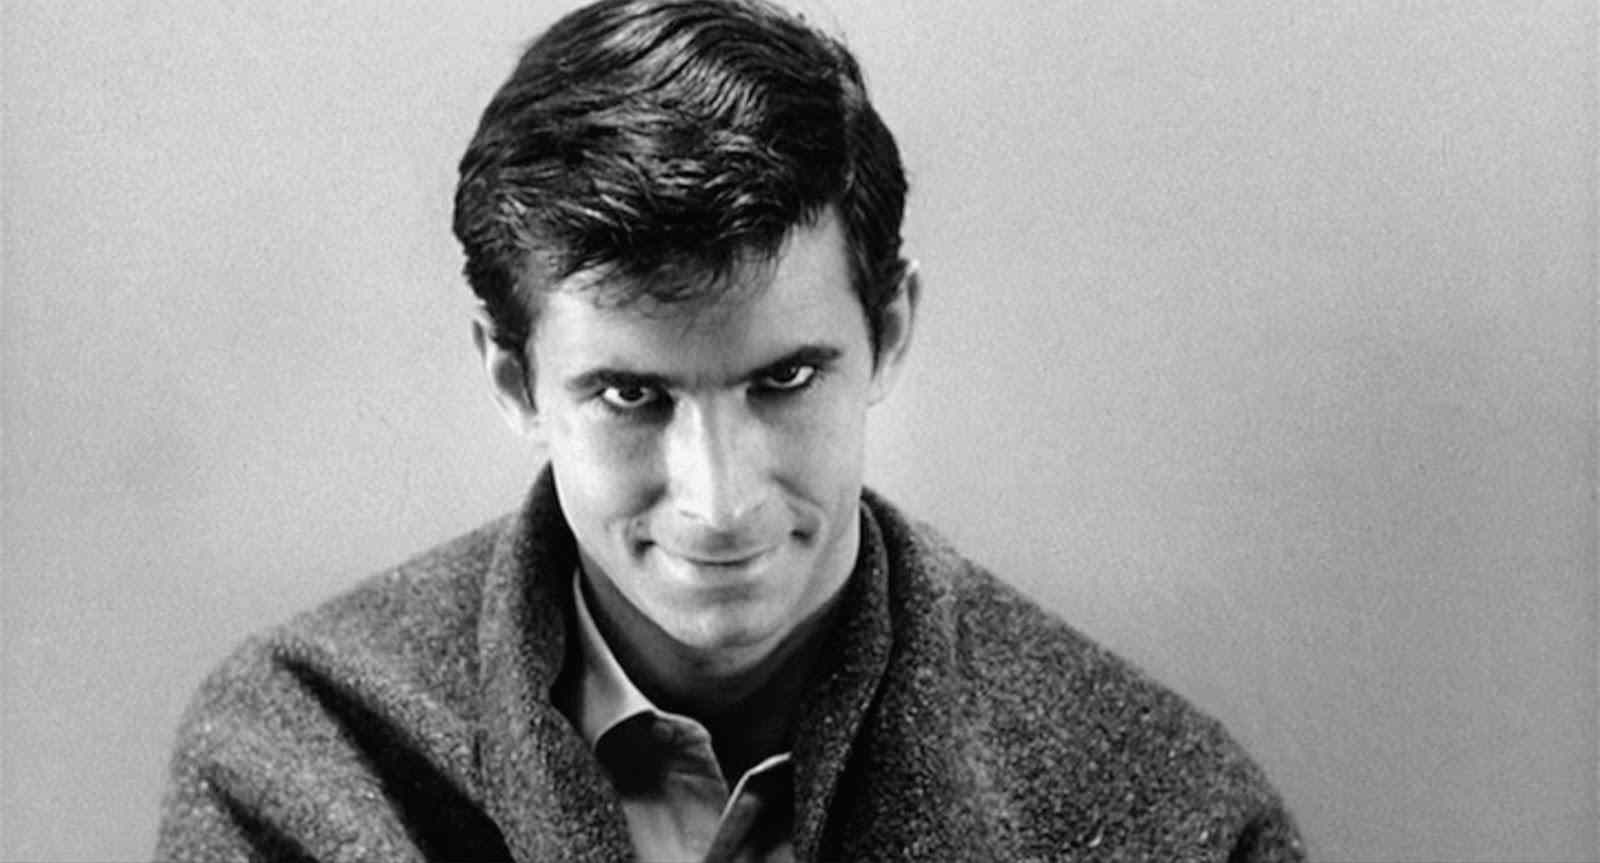 Anthony Perkins as Norman Bates in Psycho, staring at the camera.